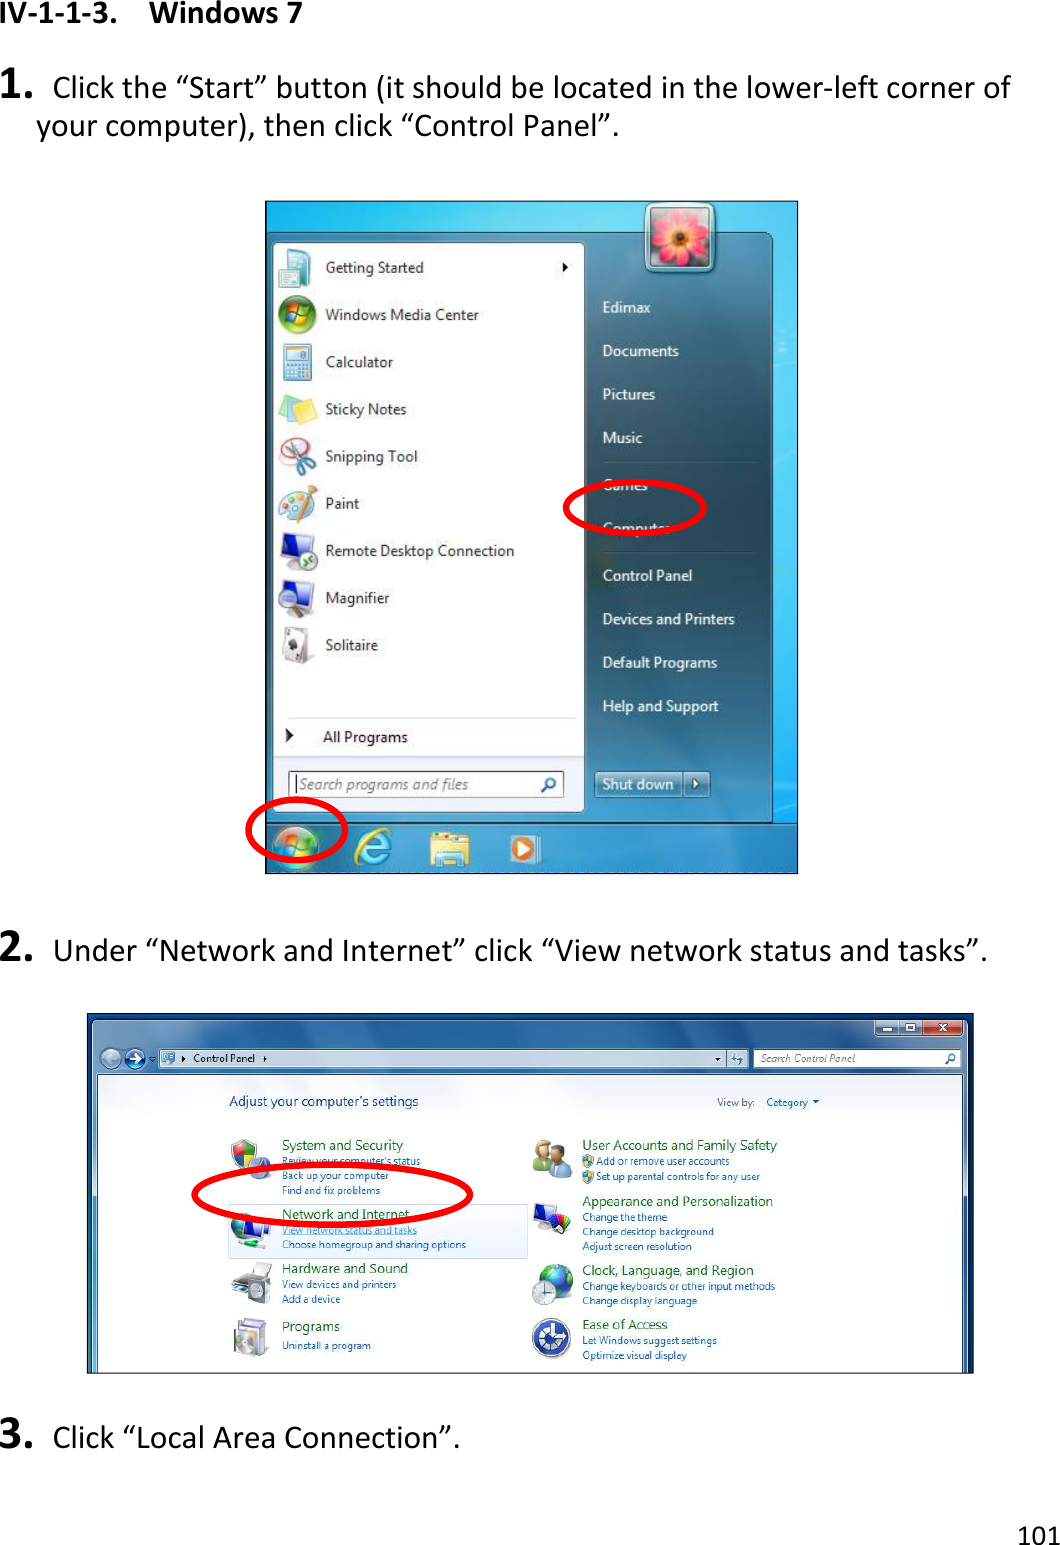 101  IV-1-1-3.  Windows 7  1.   Click the “Start” button (it should be located in the lower-left corner of your computer), then click “Control Panel”.    2.   Under “Network and Internet” click “View network status and tasks”.    3.   Click “Local Area Connection”.  